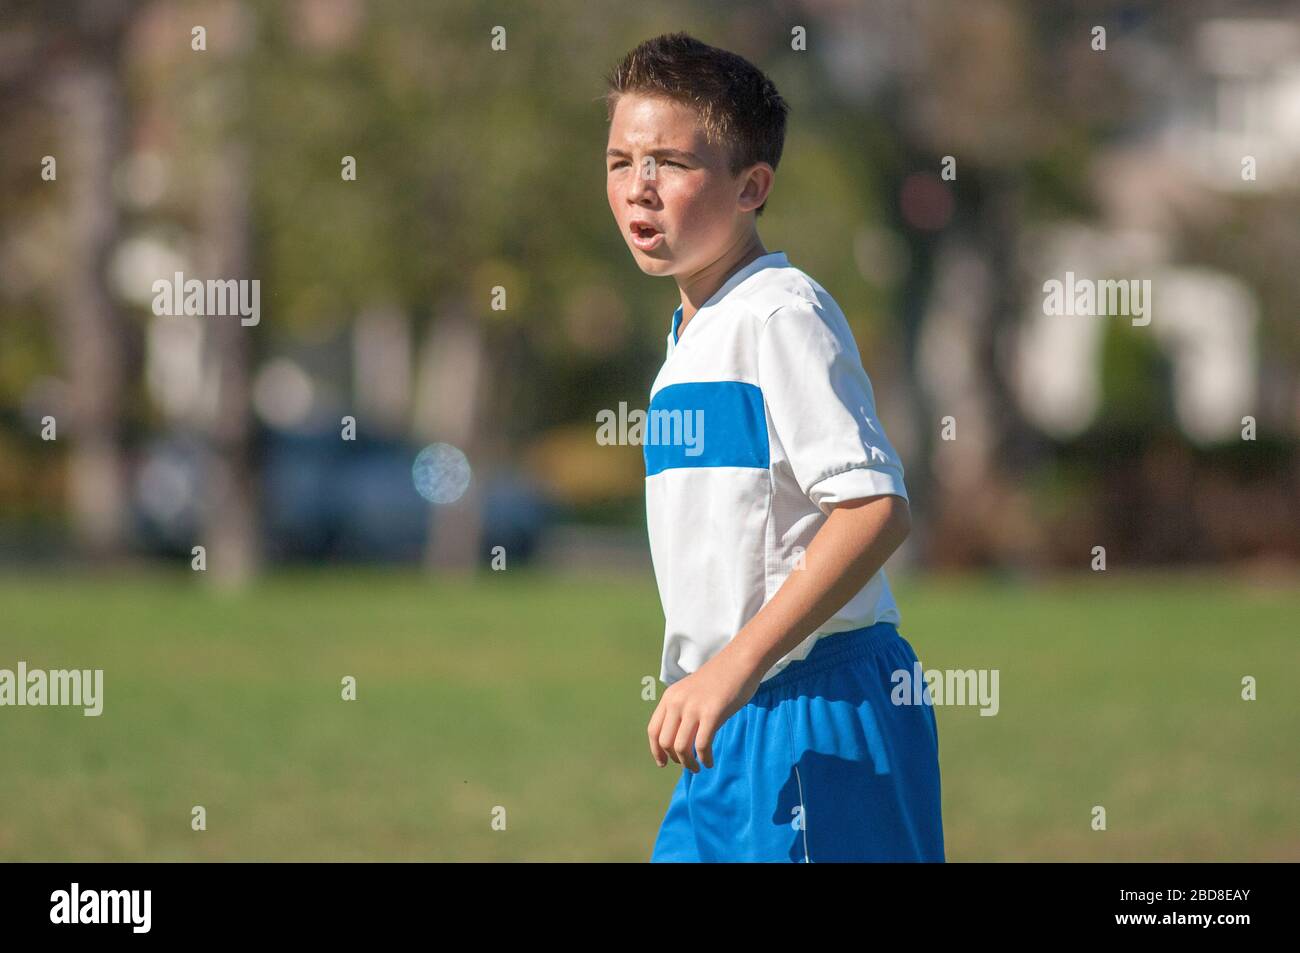 Teen soccer player yelling on the field Stock Photo